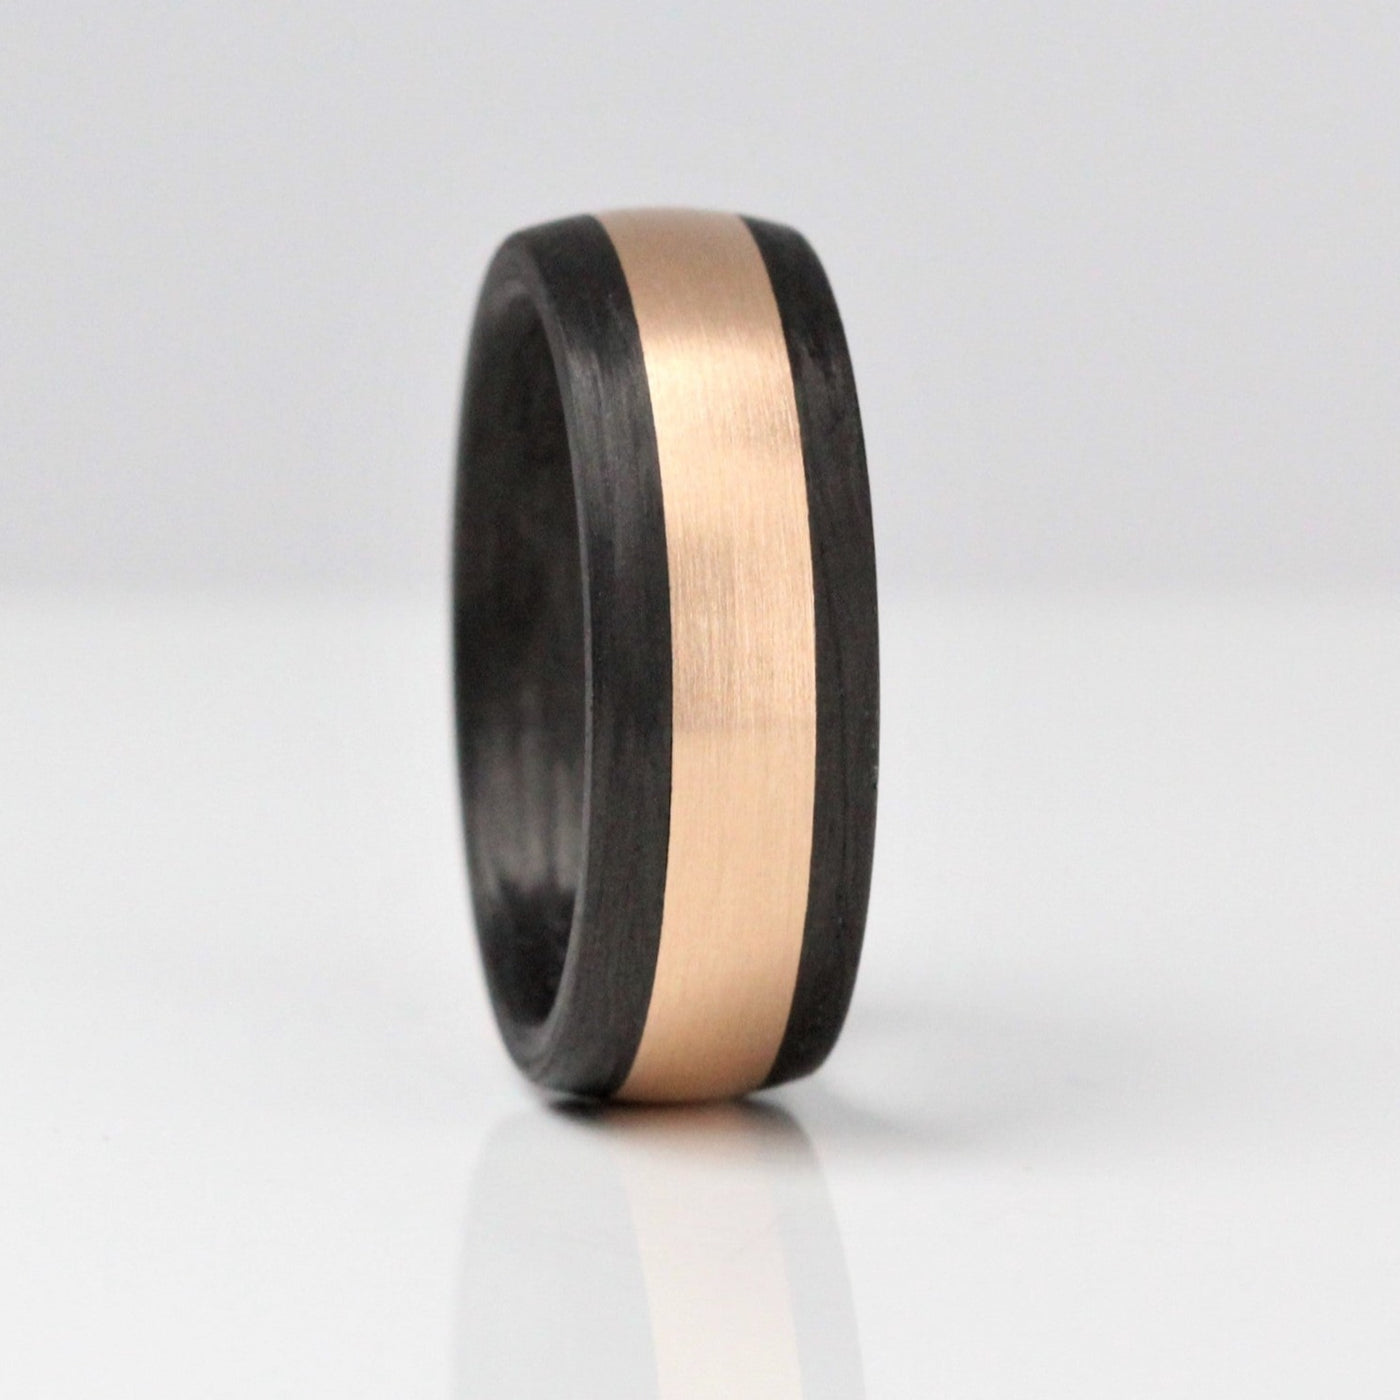 black carbon fibre wedding ring band. 8mm wide with a centre of rose gold. black mans wedding ring band uk